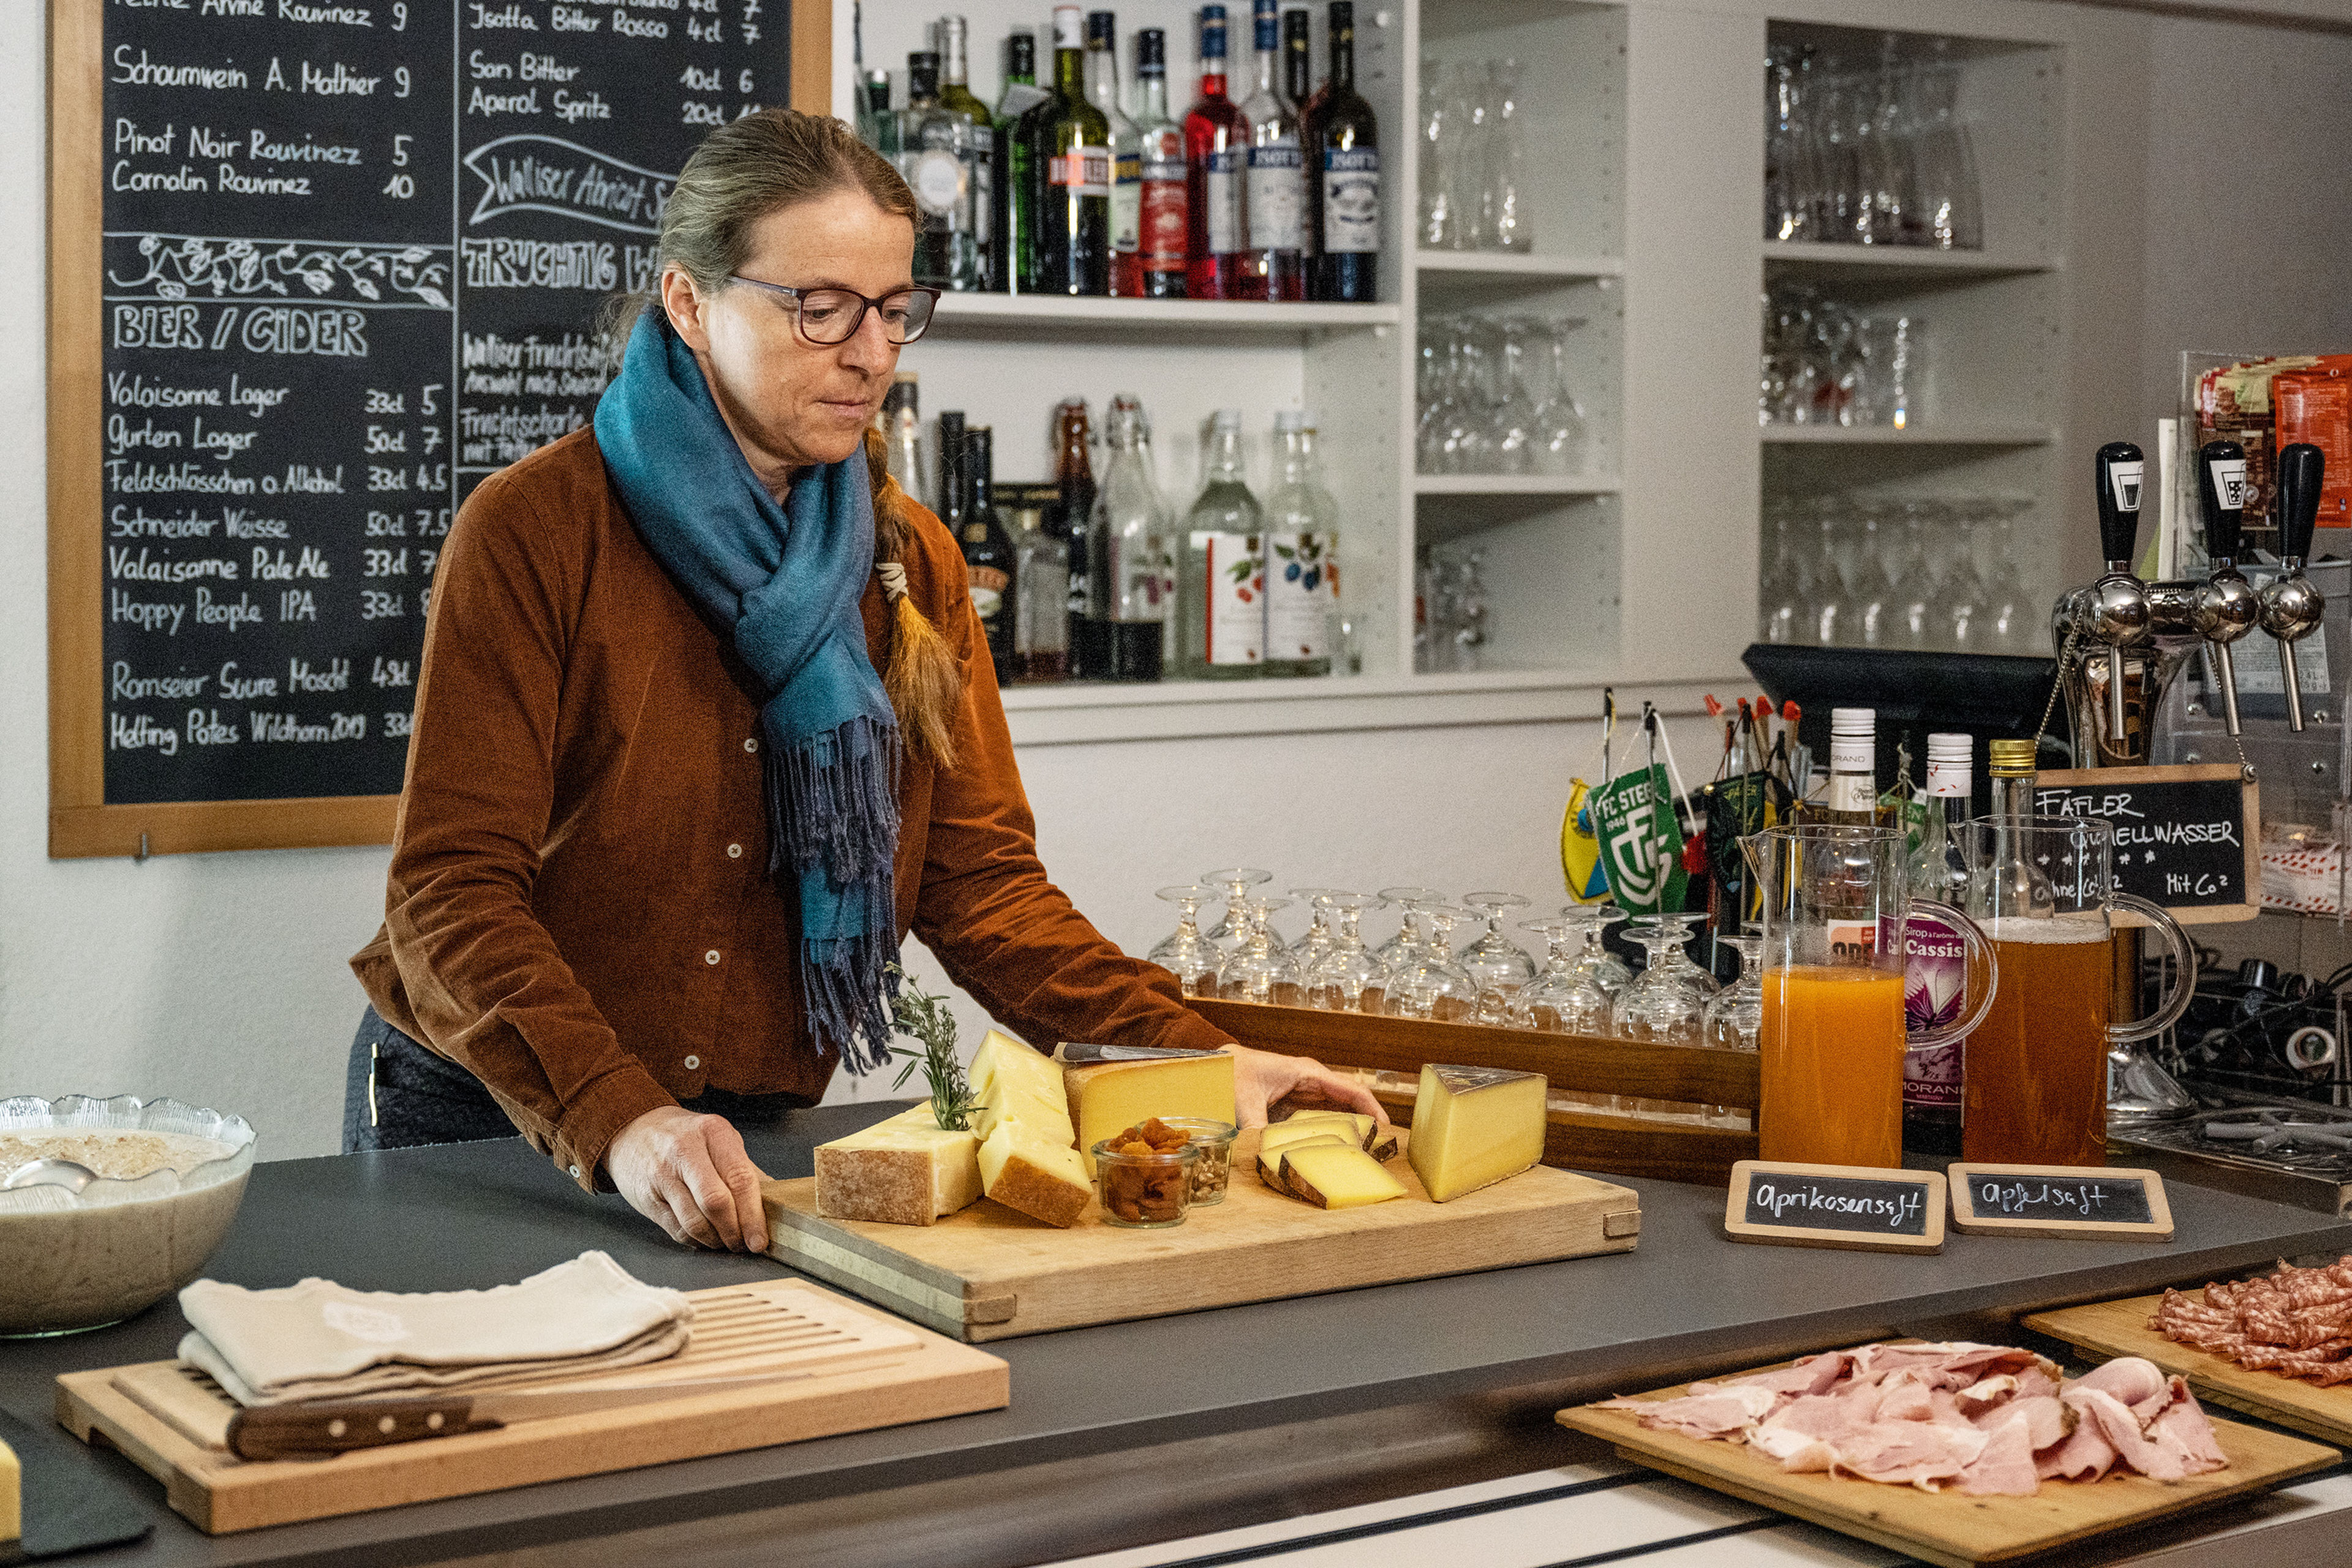 Tatjana prepares a buffet breakfast for her guests each morning. Valais cheeses and apricot juice from the apricot canton of Switzerland are always served.